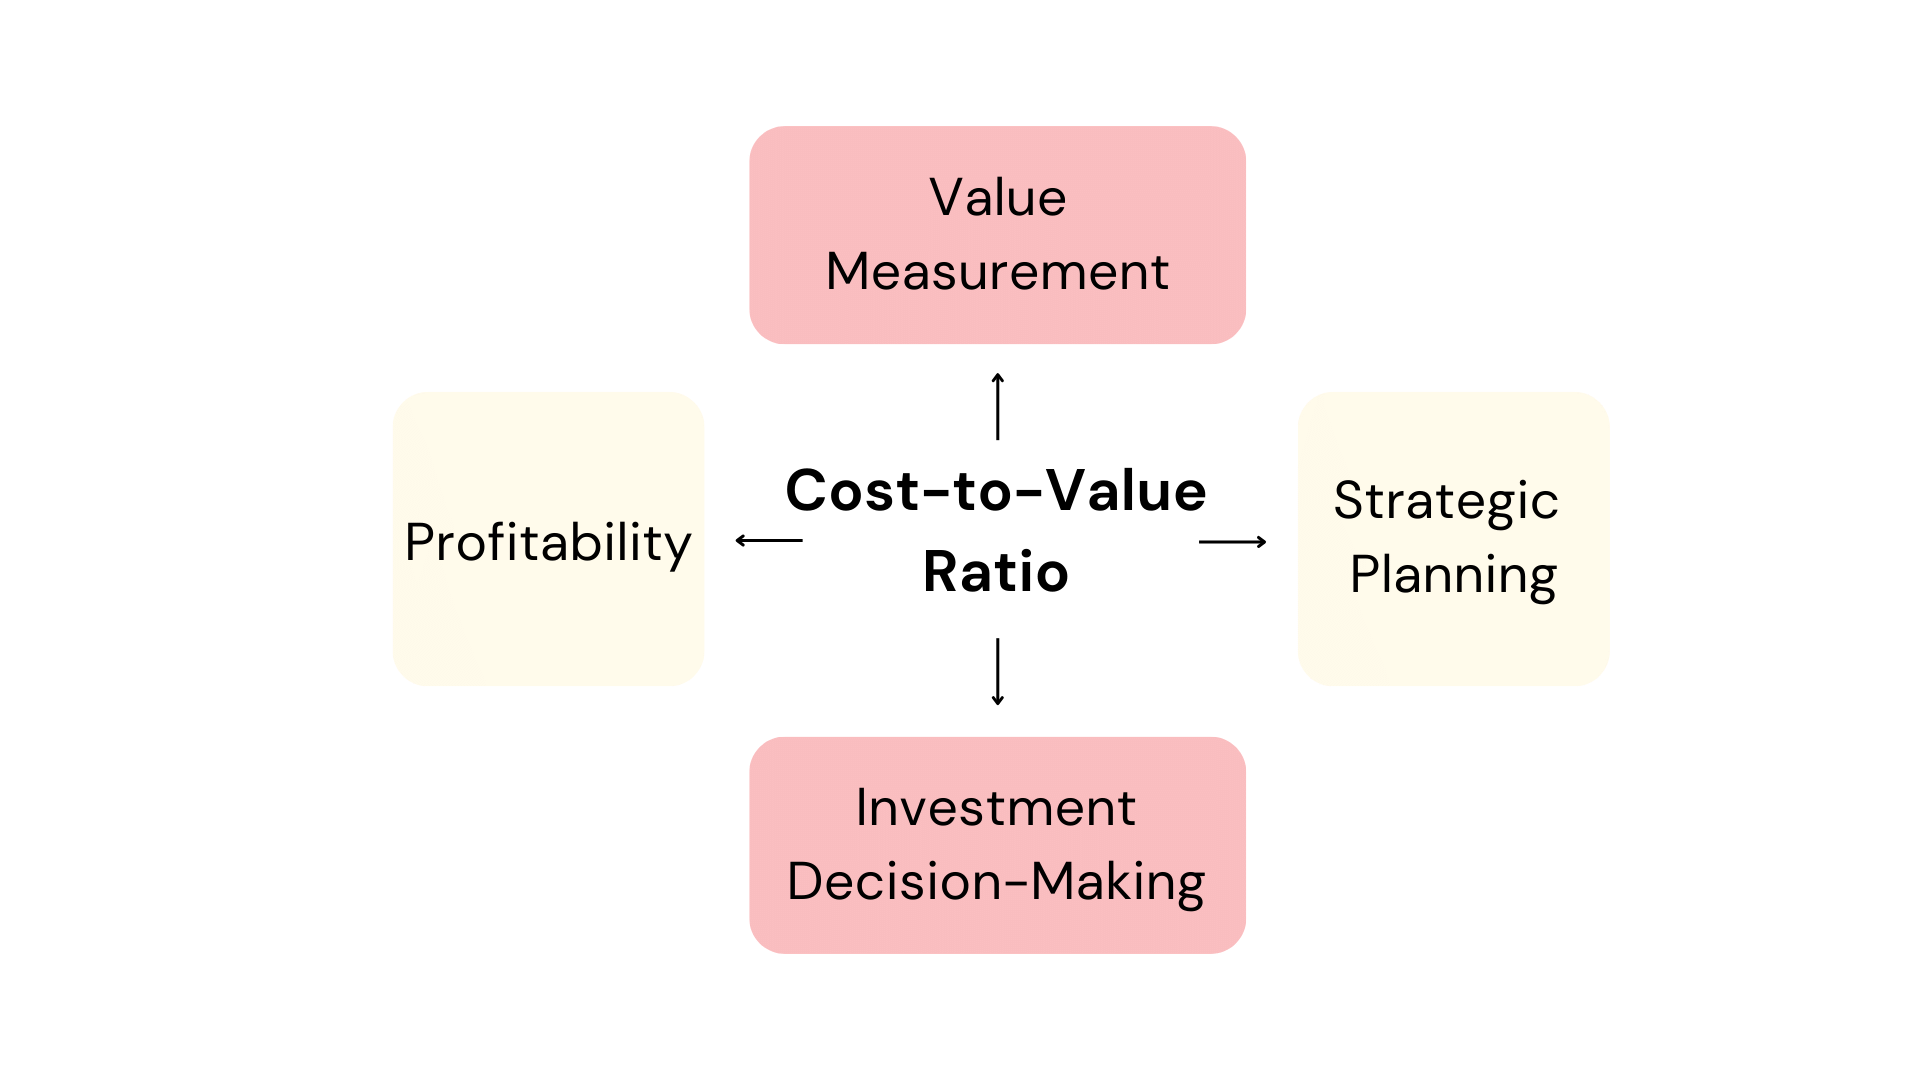 Cost-to-Value Ratio